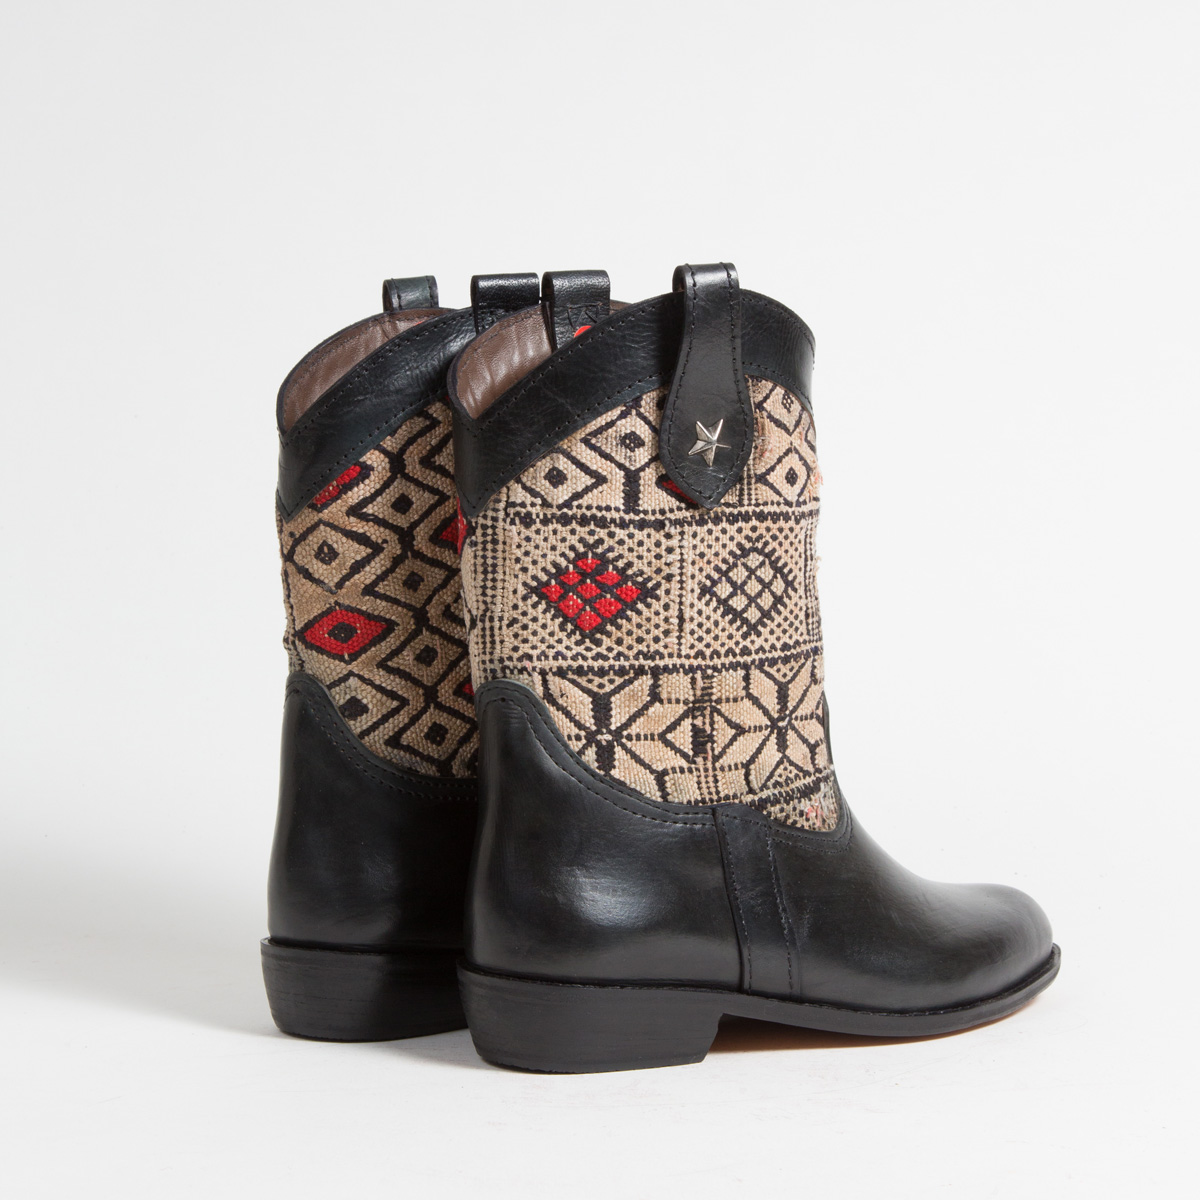 Bottines Kilim cuir mababouche artisanales (Réf. MN7-39)